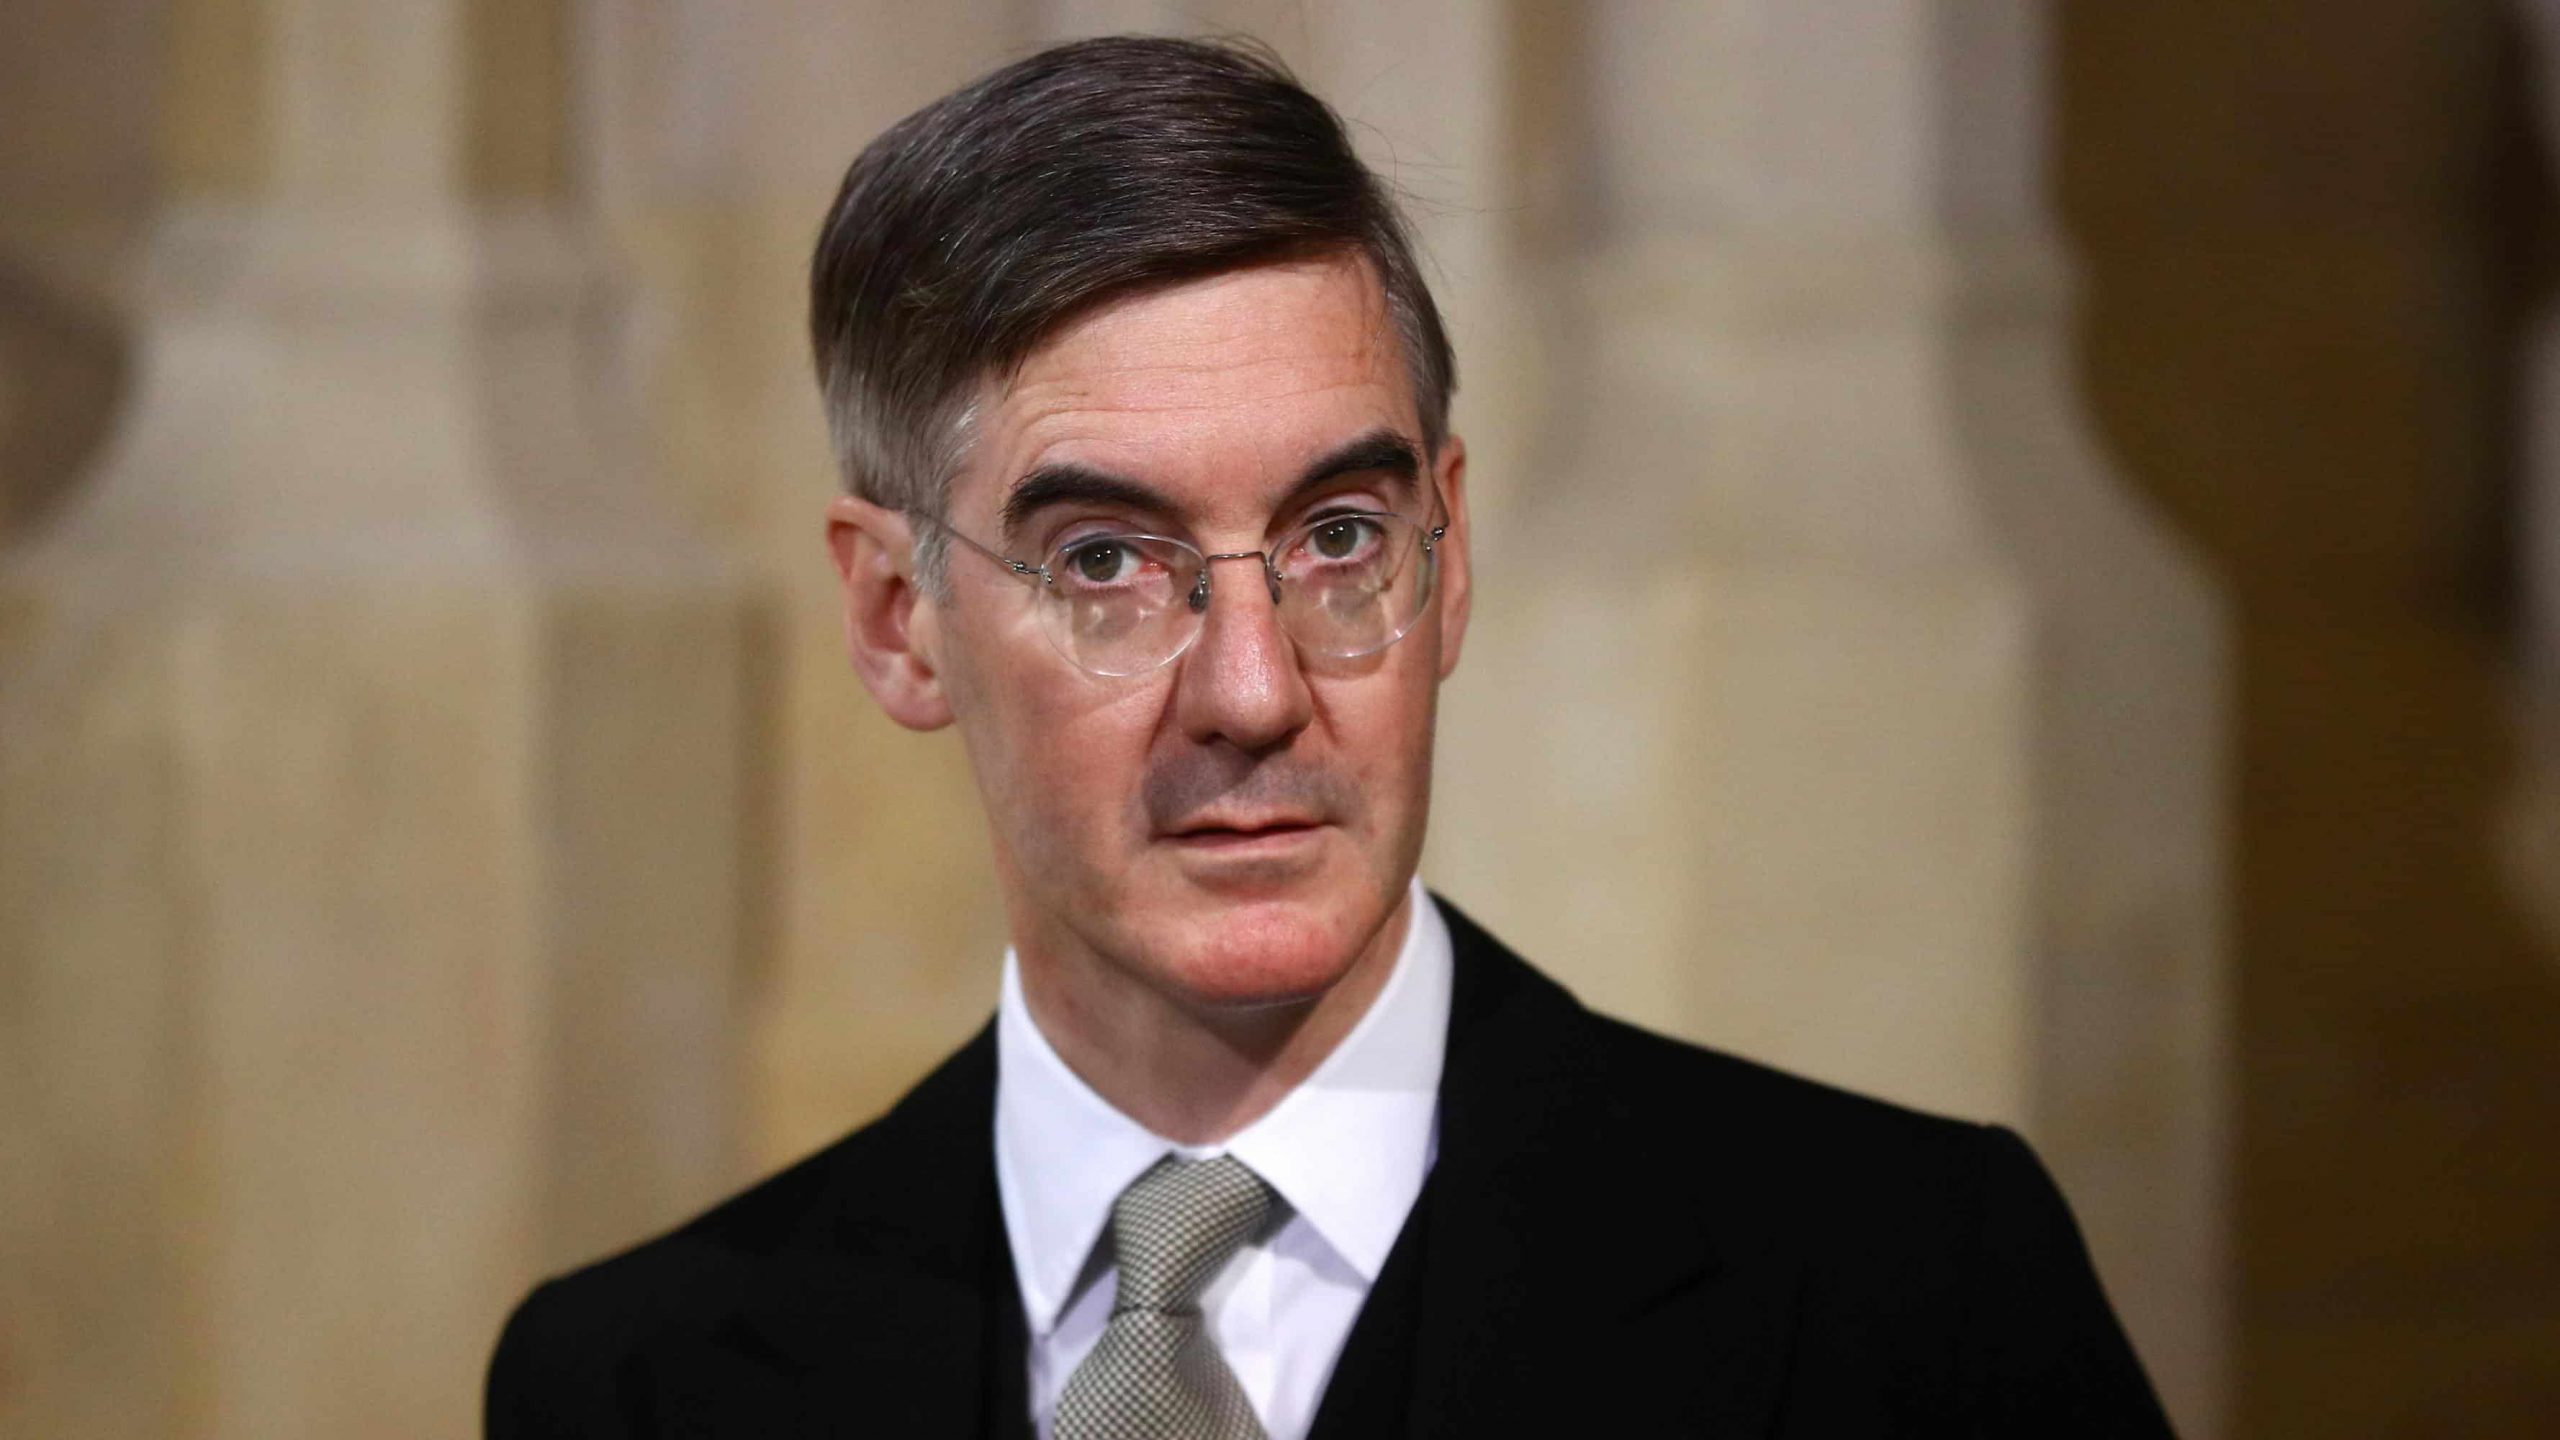 Rees Mogg tells campaigner: We won’t debate petitions unless they’re hosted on government site